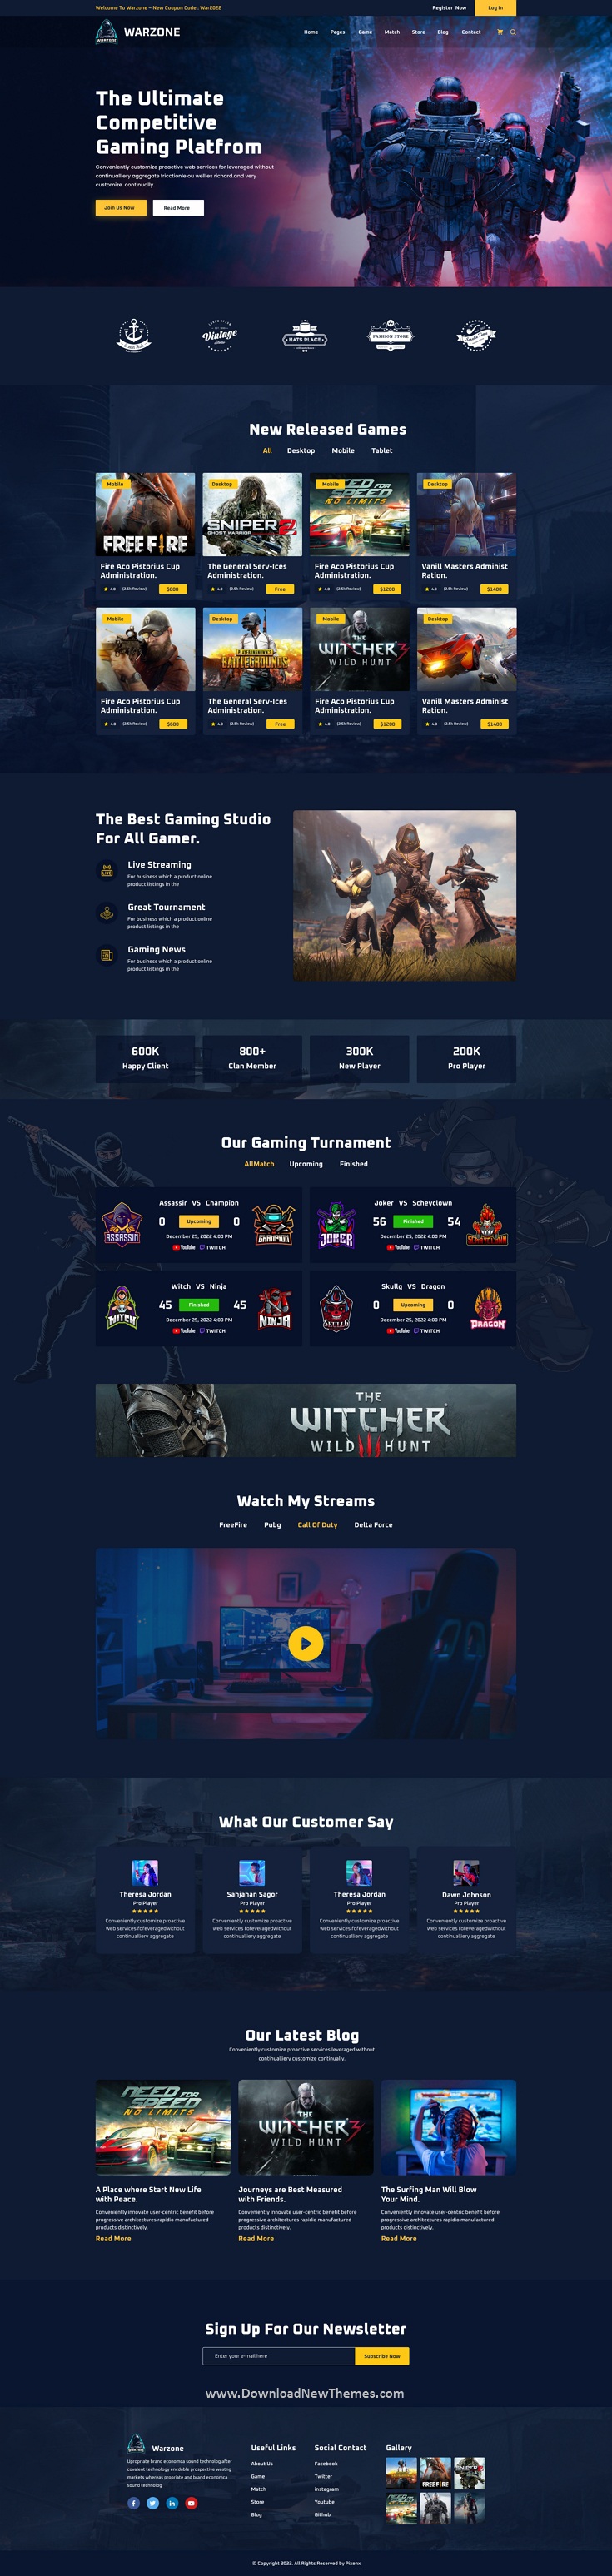 Warzone - eSports And Gaming Tournaments Figma Template Review